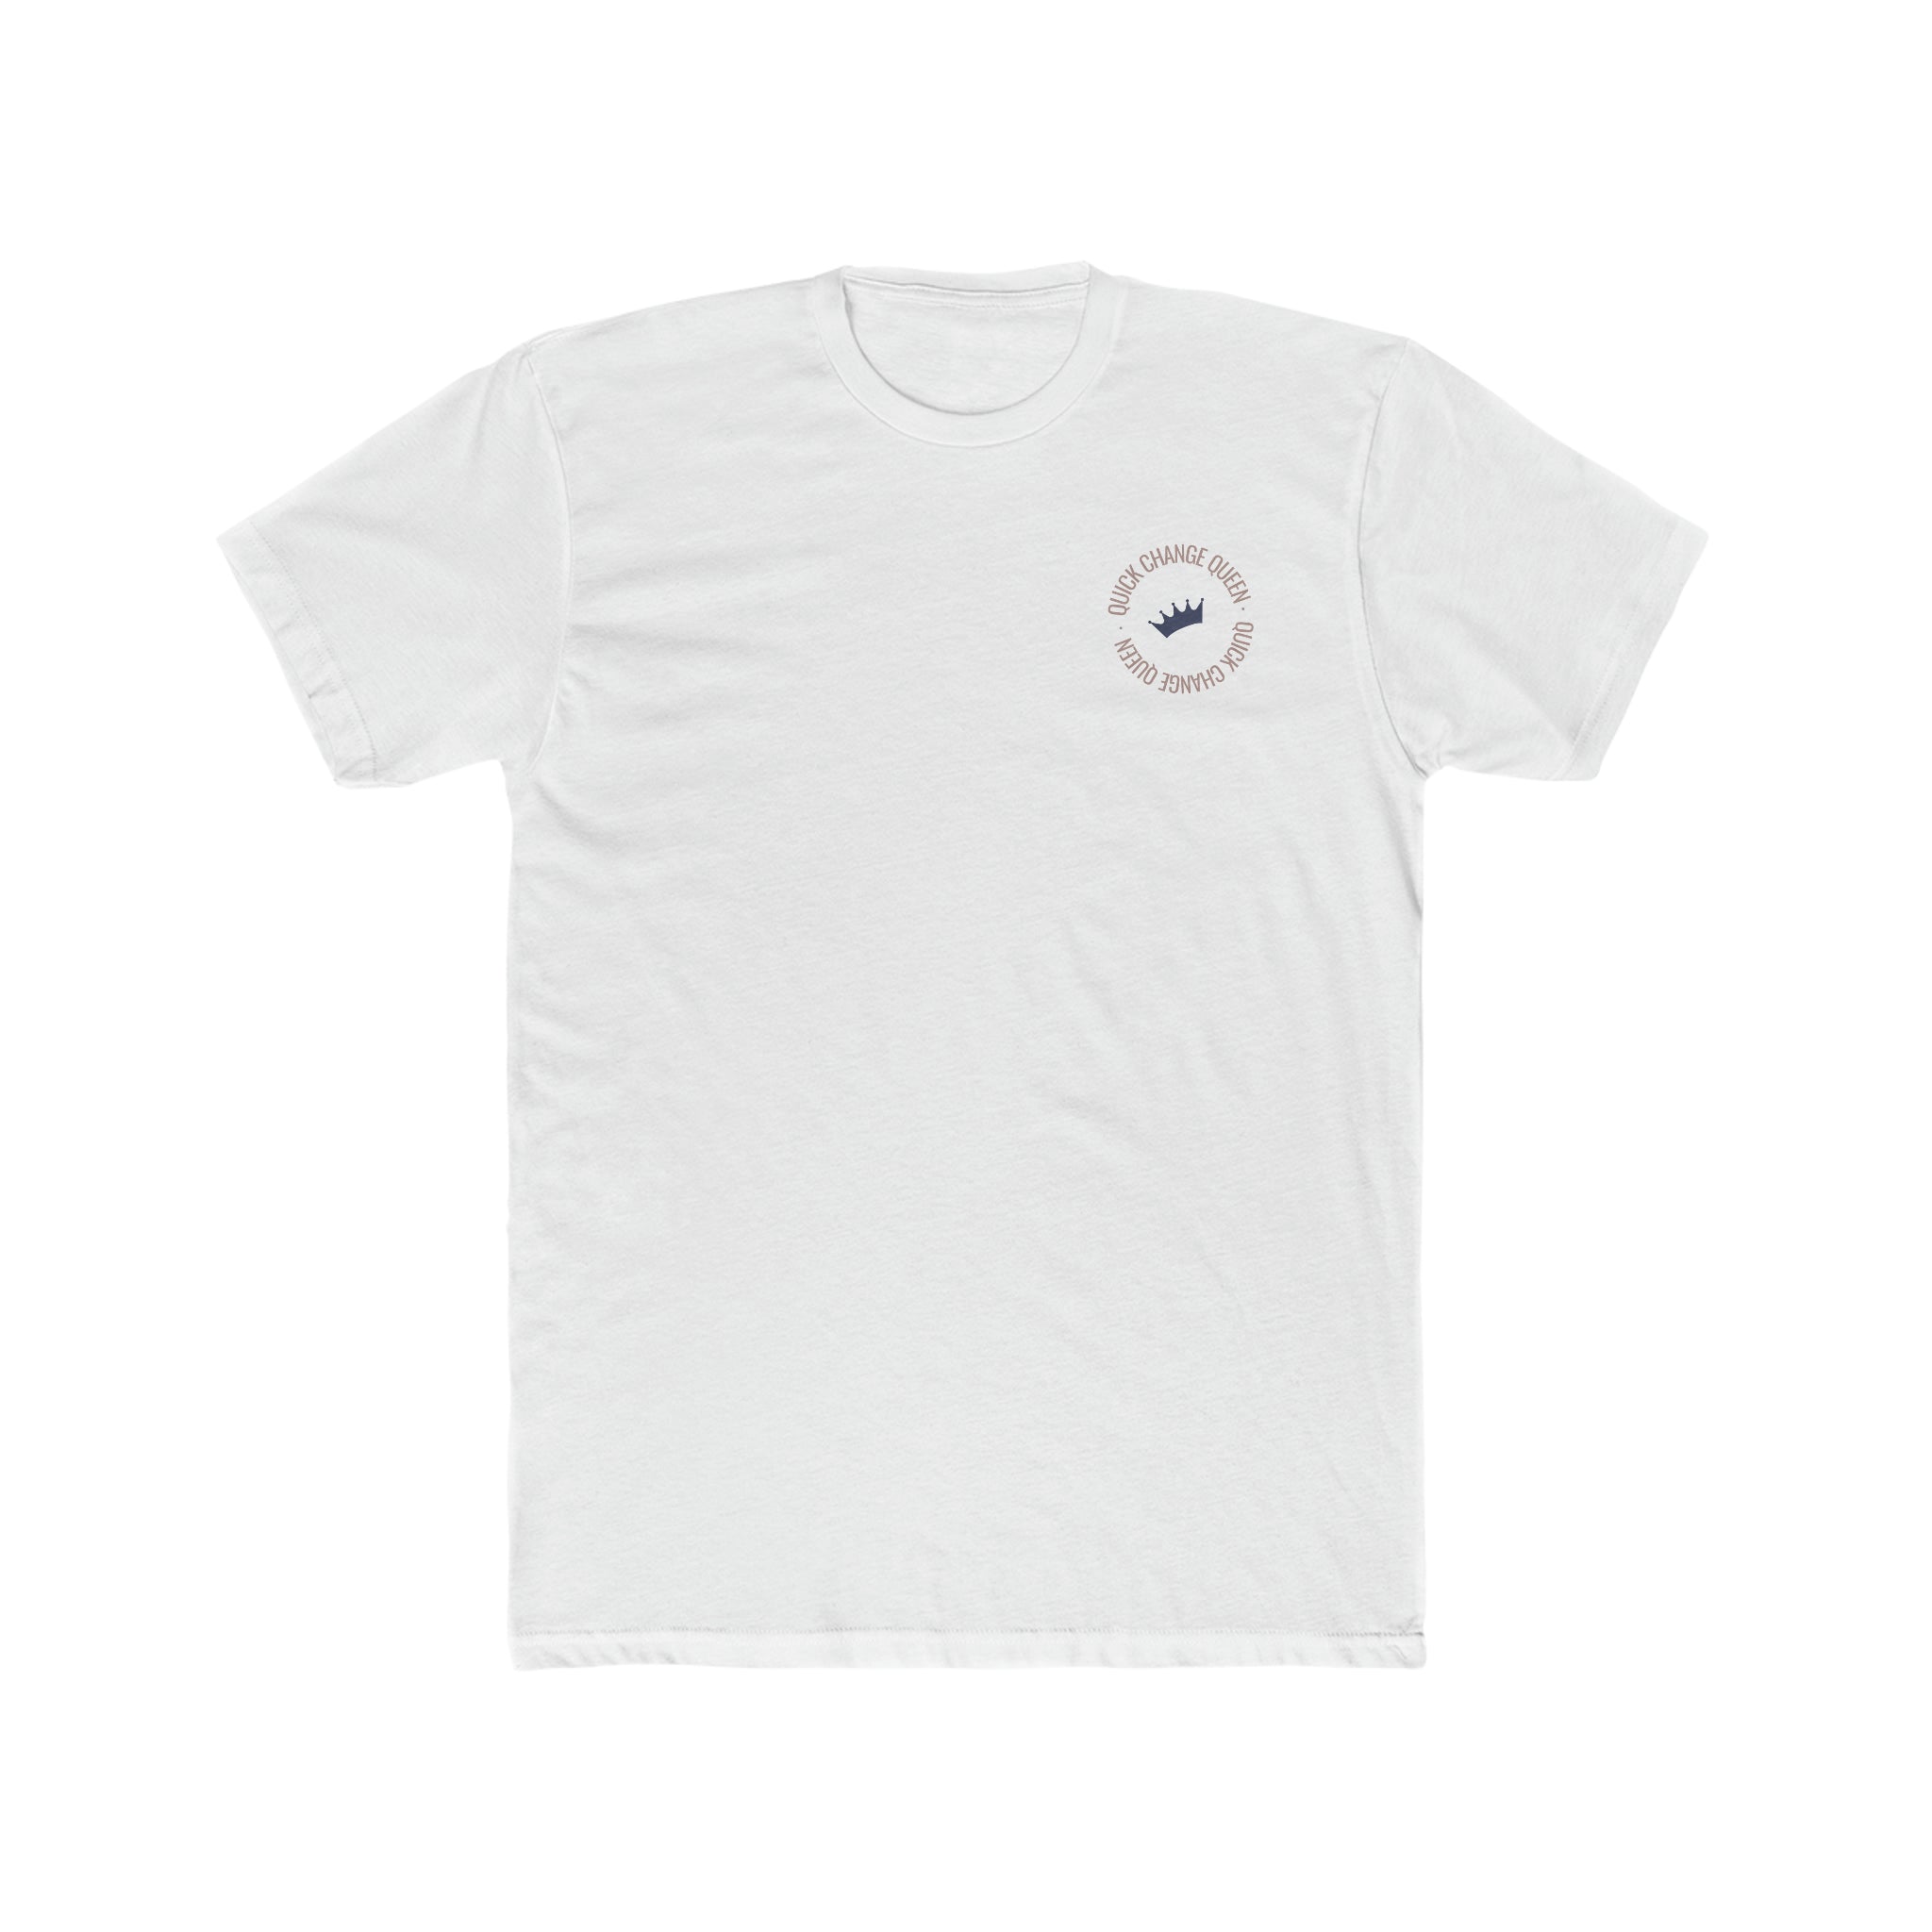 "Quick Change Queen" circle t-shirt - Classic fit